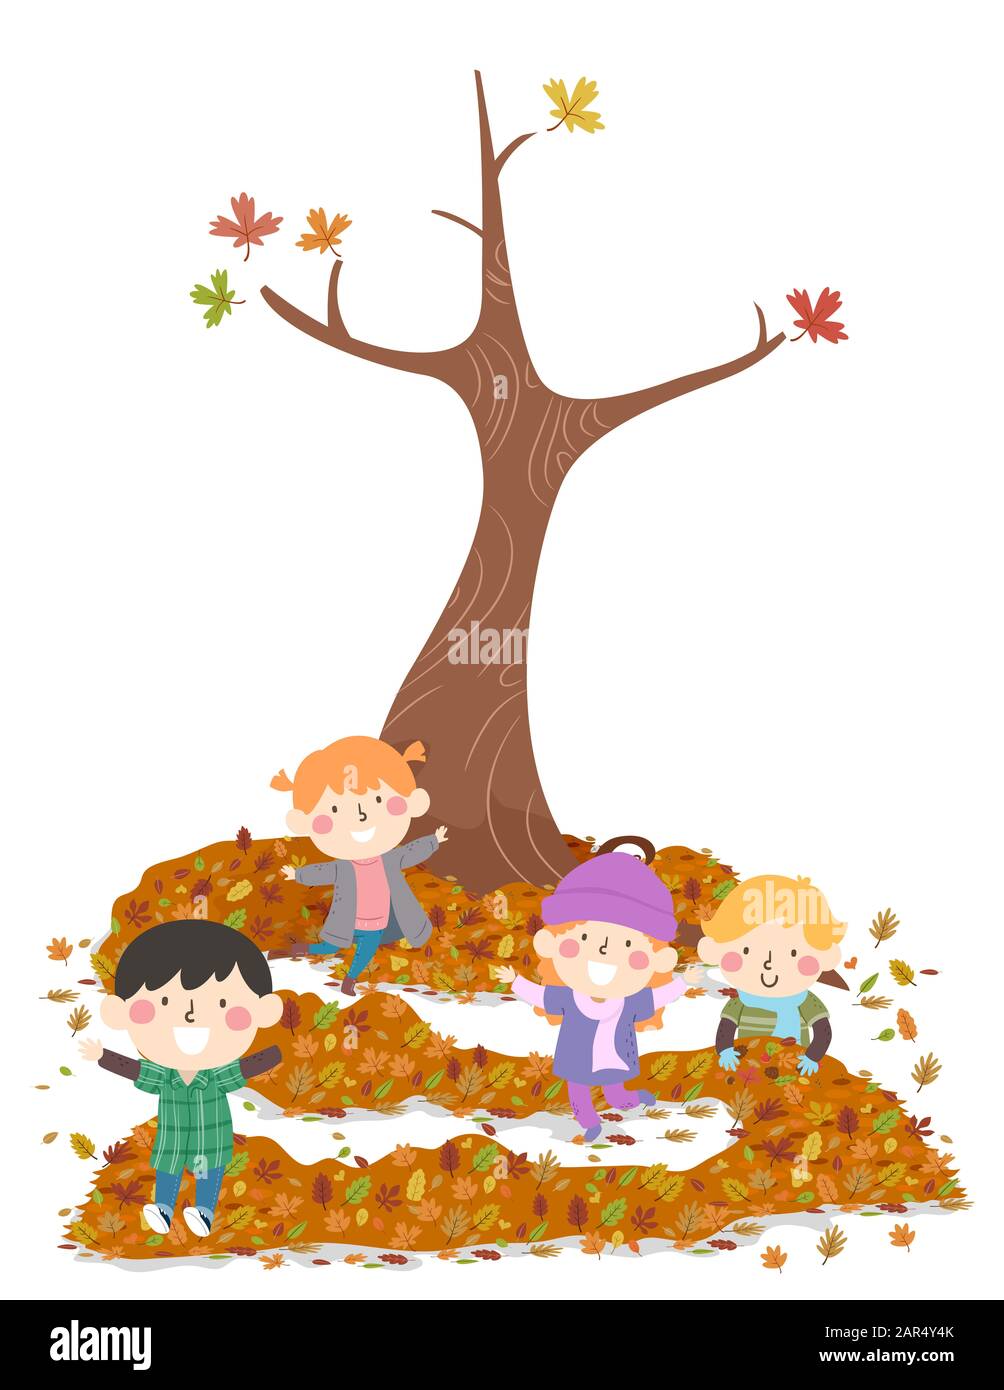 Illustration of Kids Playing with Leaf Maze Fallen from Nearby Tree in Autumn Stock Photo